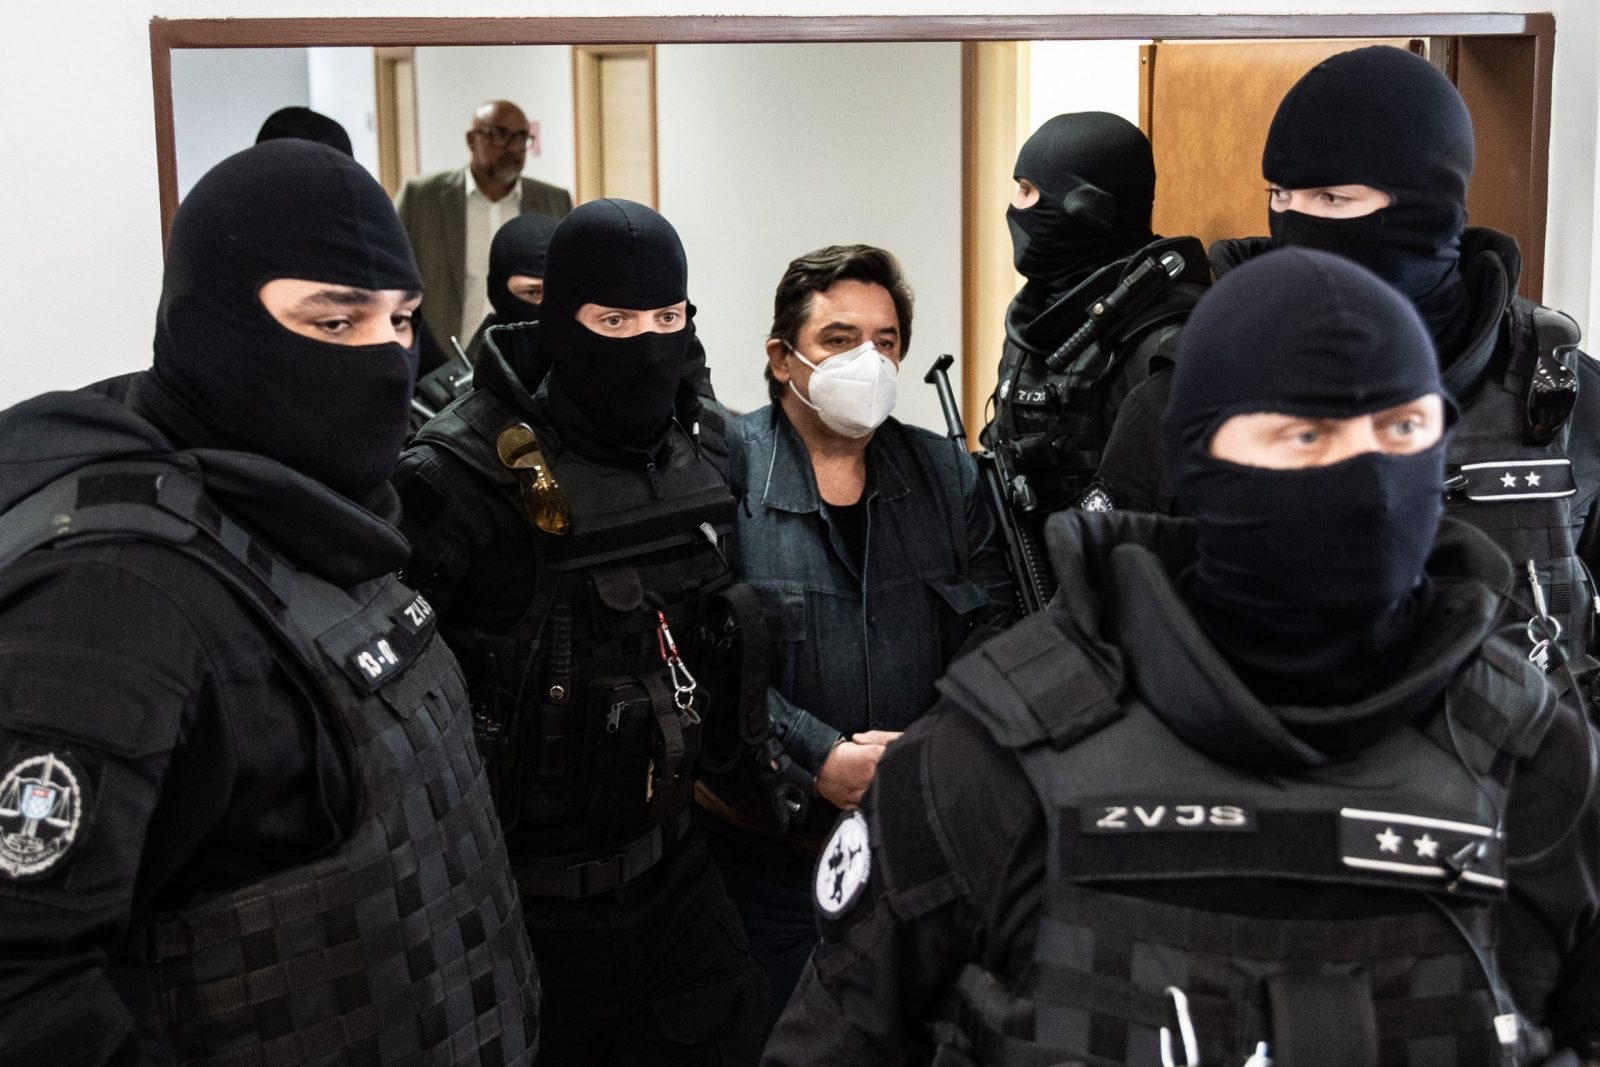 epa10638794 Slovak businessman Marian Kocner (C) is escorted by police for the main trial concerning the murder of journalist Jan Kuciak and his fiance Martina Kusnirova at the Judicial Academy building in Pezinok, Slovakia, 19 May 2023. Five years after the murder of journalist Jan Kuciak and his girlfriend Martina Kusnirova, Slovak court could pass a new judgment on Marian Kocner and Alena Zsuzsova after a new trial. The prosecution is proposing that they both receive life sentences. Both Kocner and Zsuzsova deny their guilt. The verdict from September 2020 stated that both Marian Kocner and Alena Zsuzsova are innocent in the case of the murder of Jan Kuciak and Martina Kusnirova, mainly due to a lack of evidence. The Supreme Court overturned the acquittal verdict in 2021 and remanded the case back to the trial court for reconsideration, in part because of numerous errors and illogical procedures.  EPA/JAKUB GAVLAK